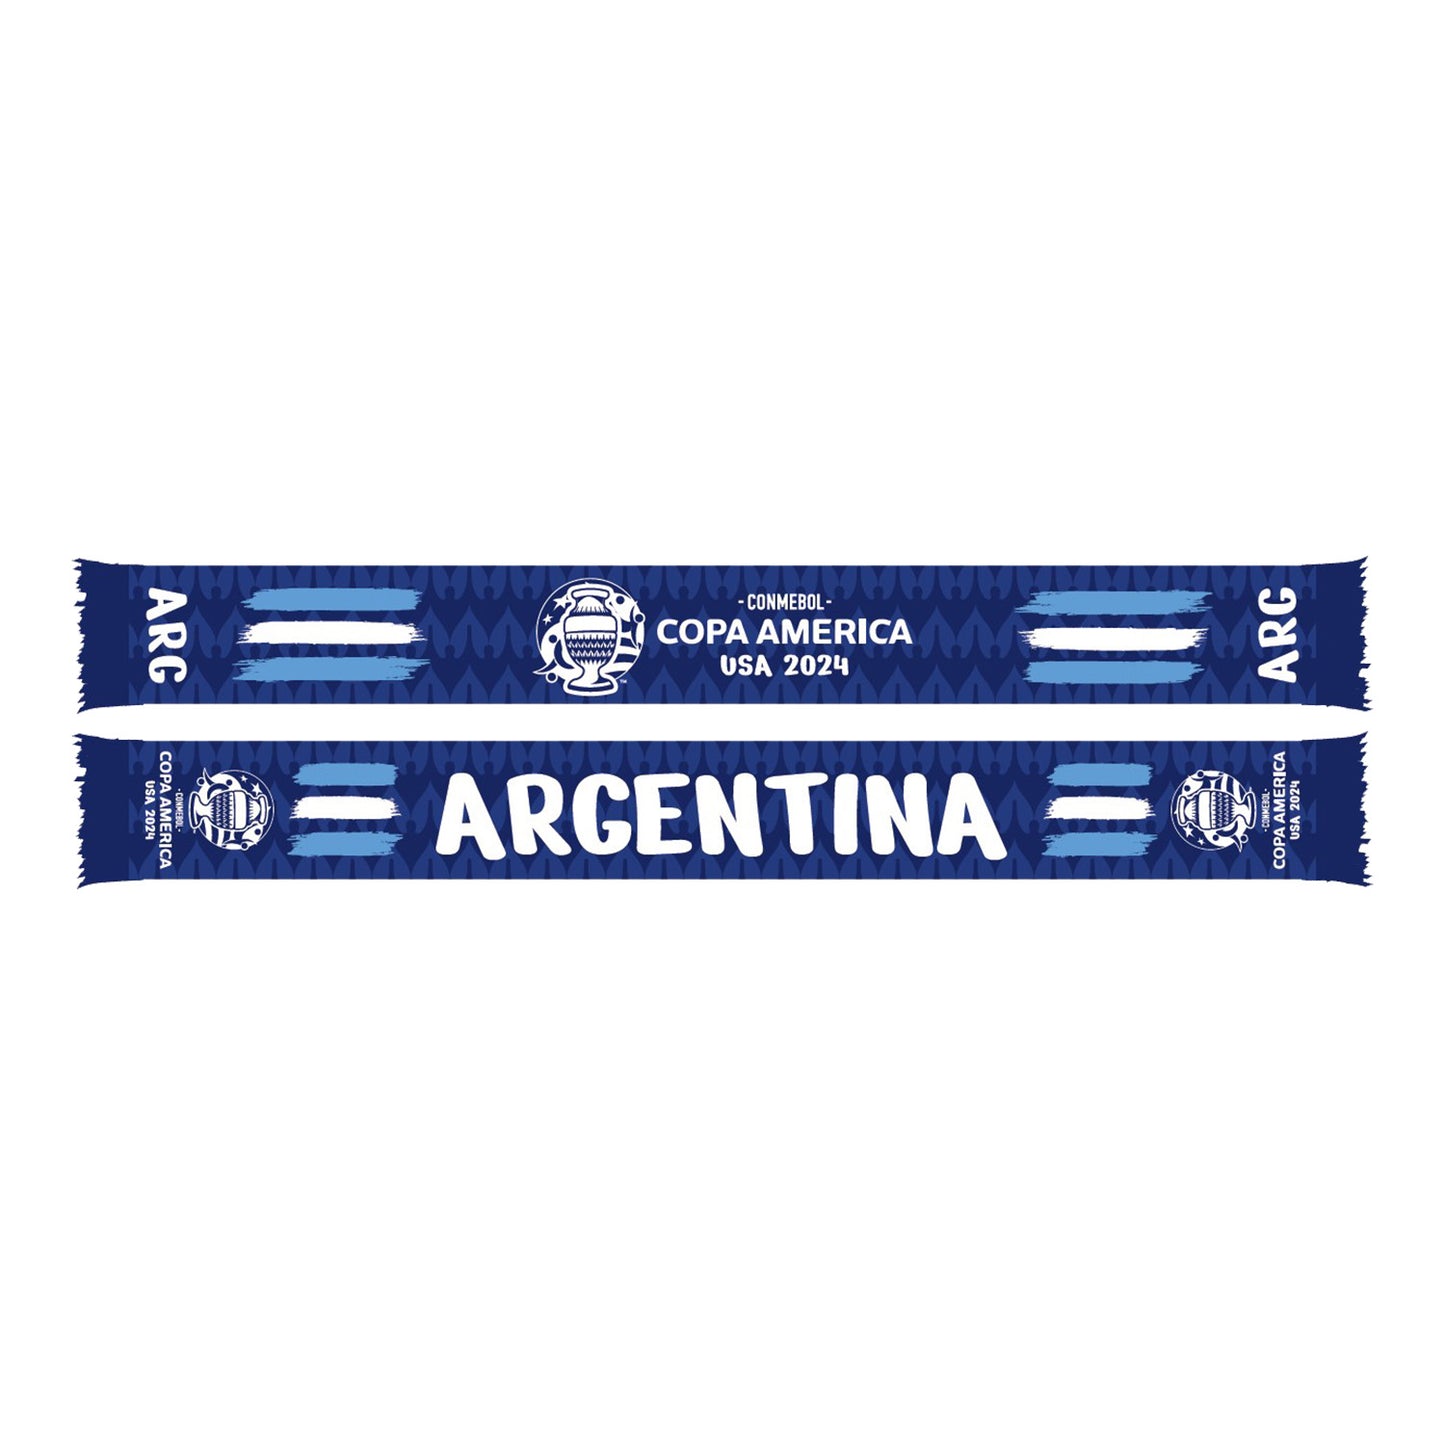 Argentina COPA America Scarf - Front and Back View